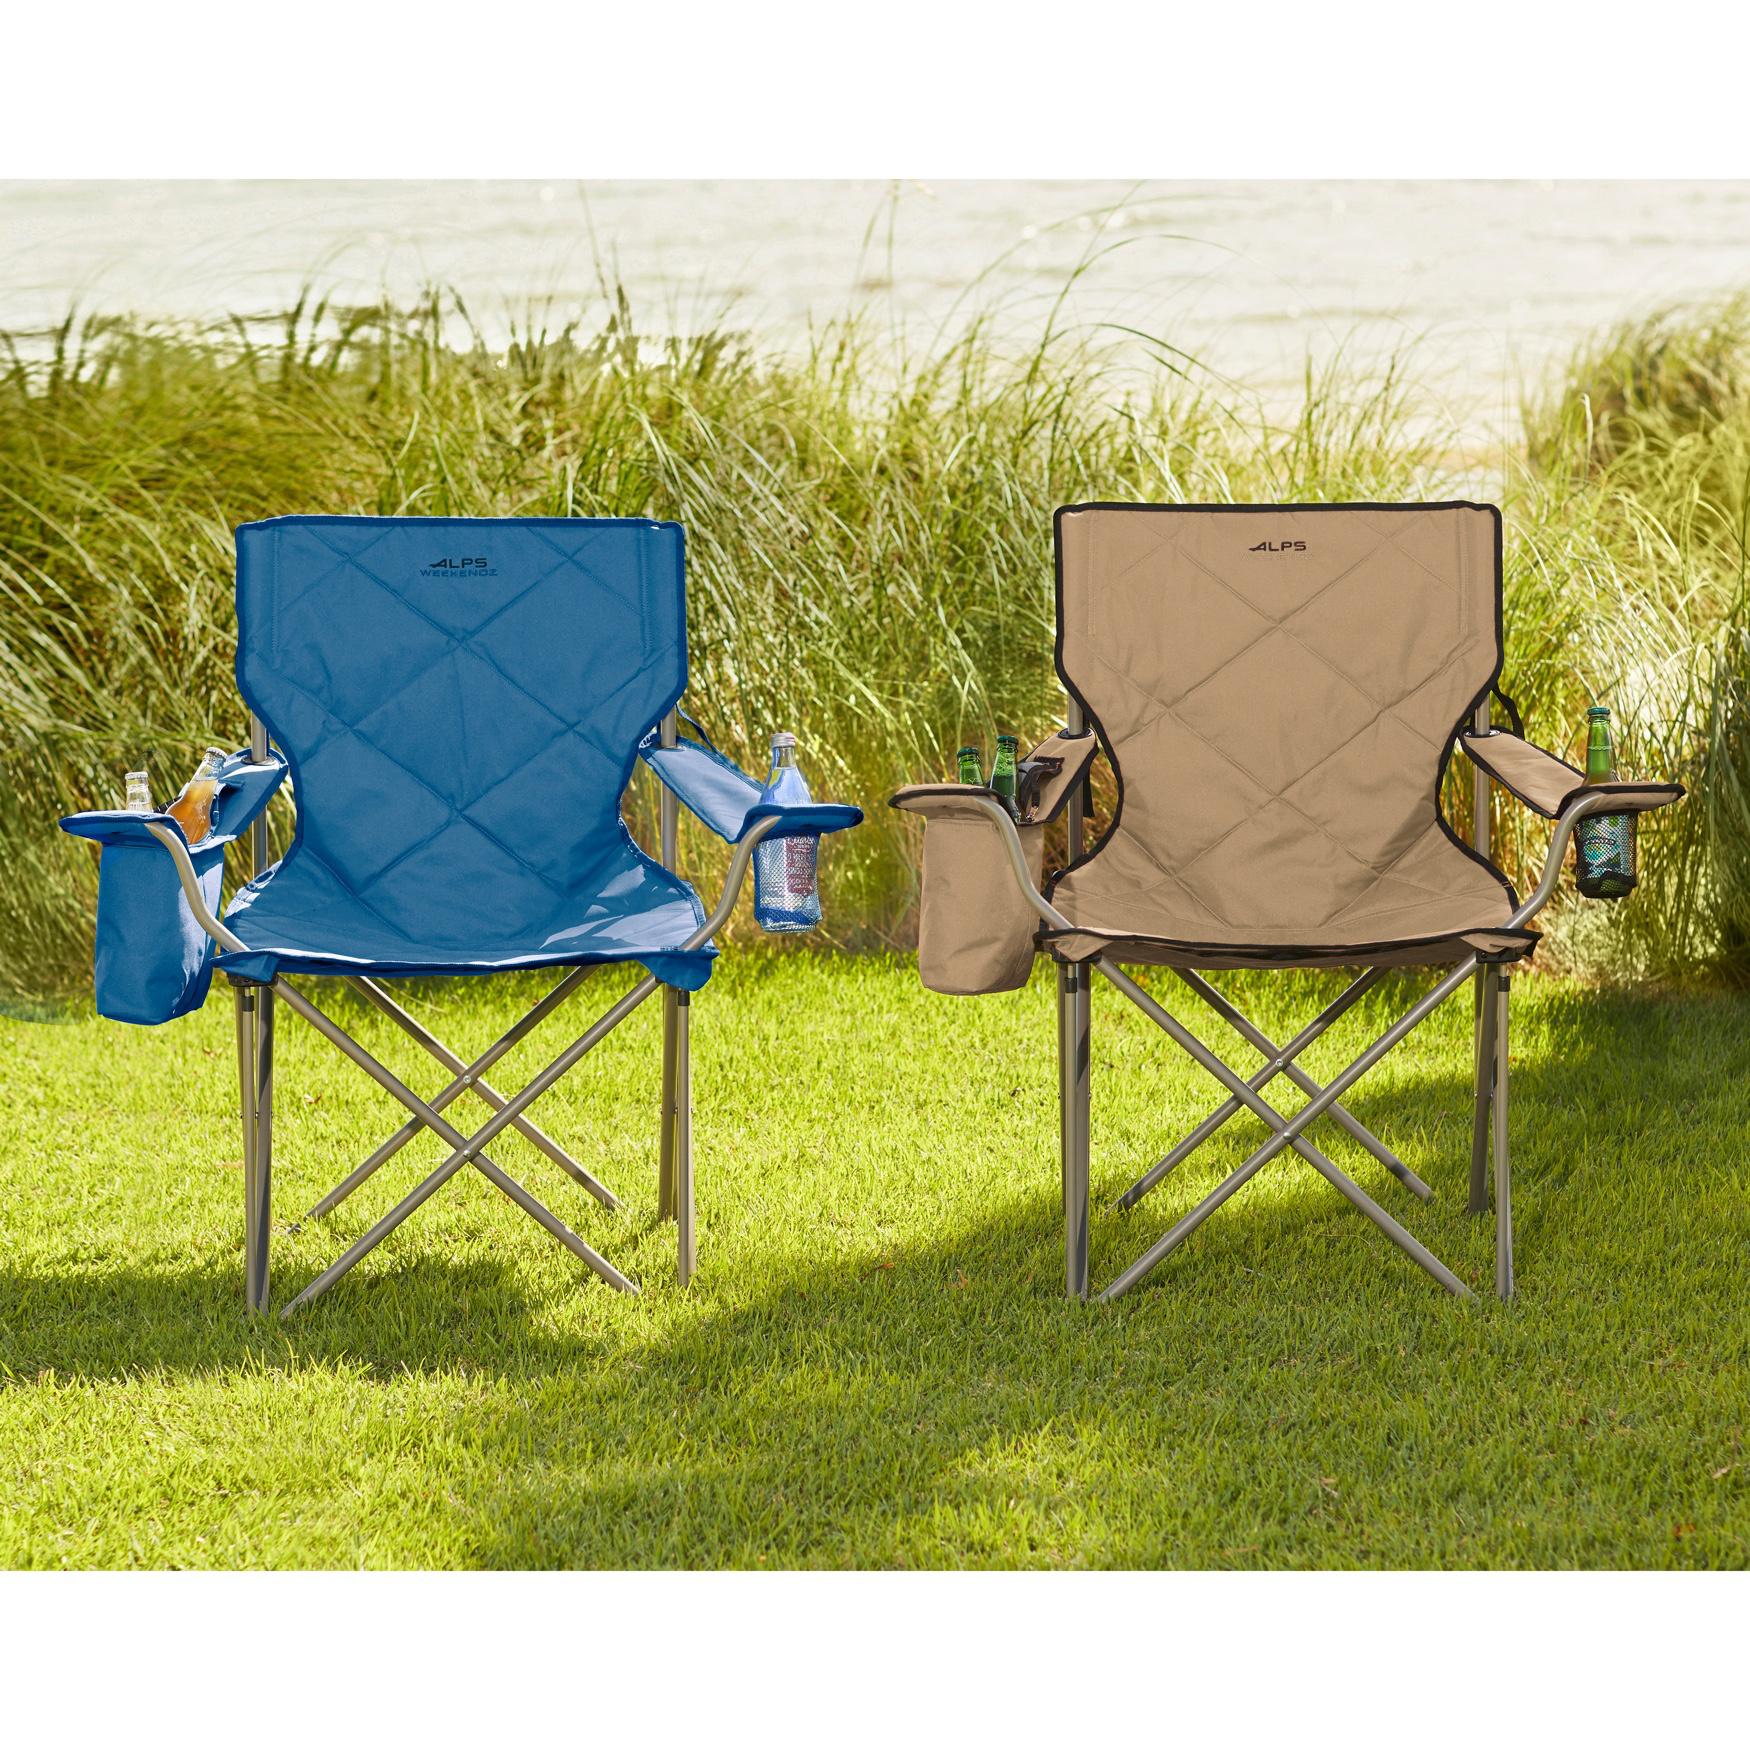 Extra Wide King Kong Folding Camp Chair, 